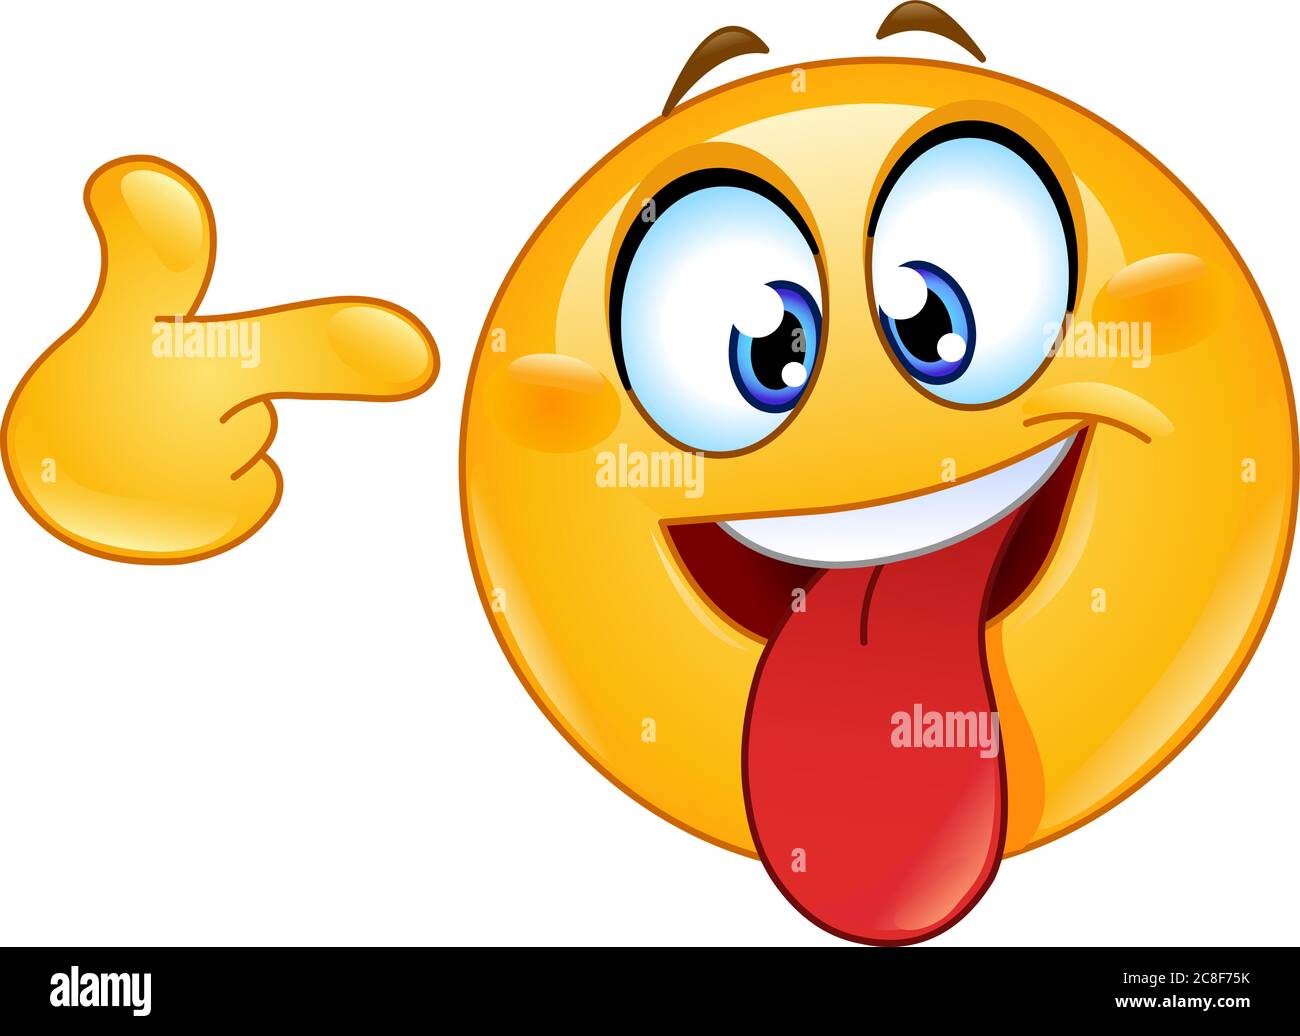 Tongue out emoji Stock Vector Images - Alamy